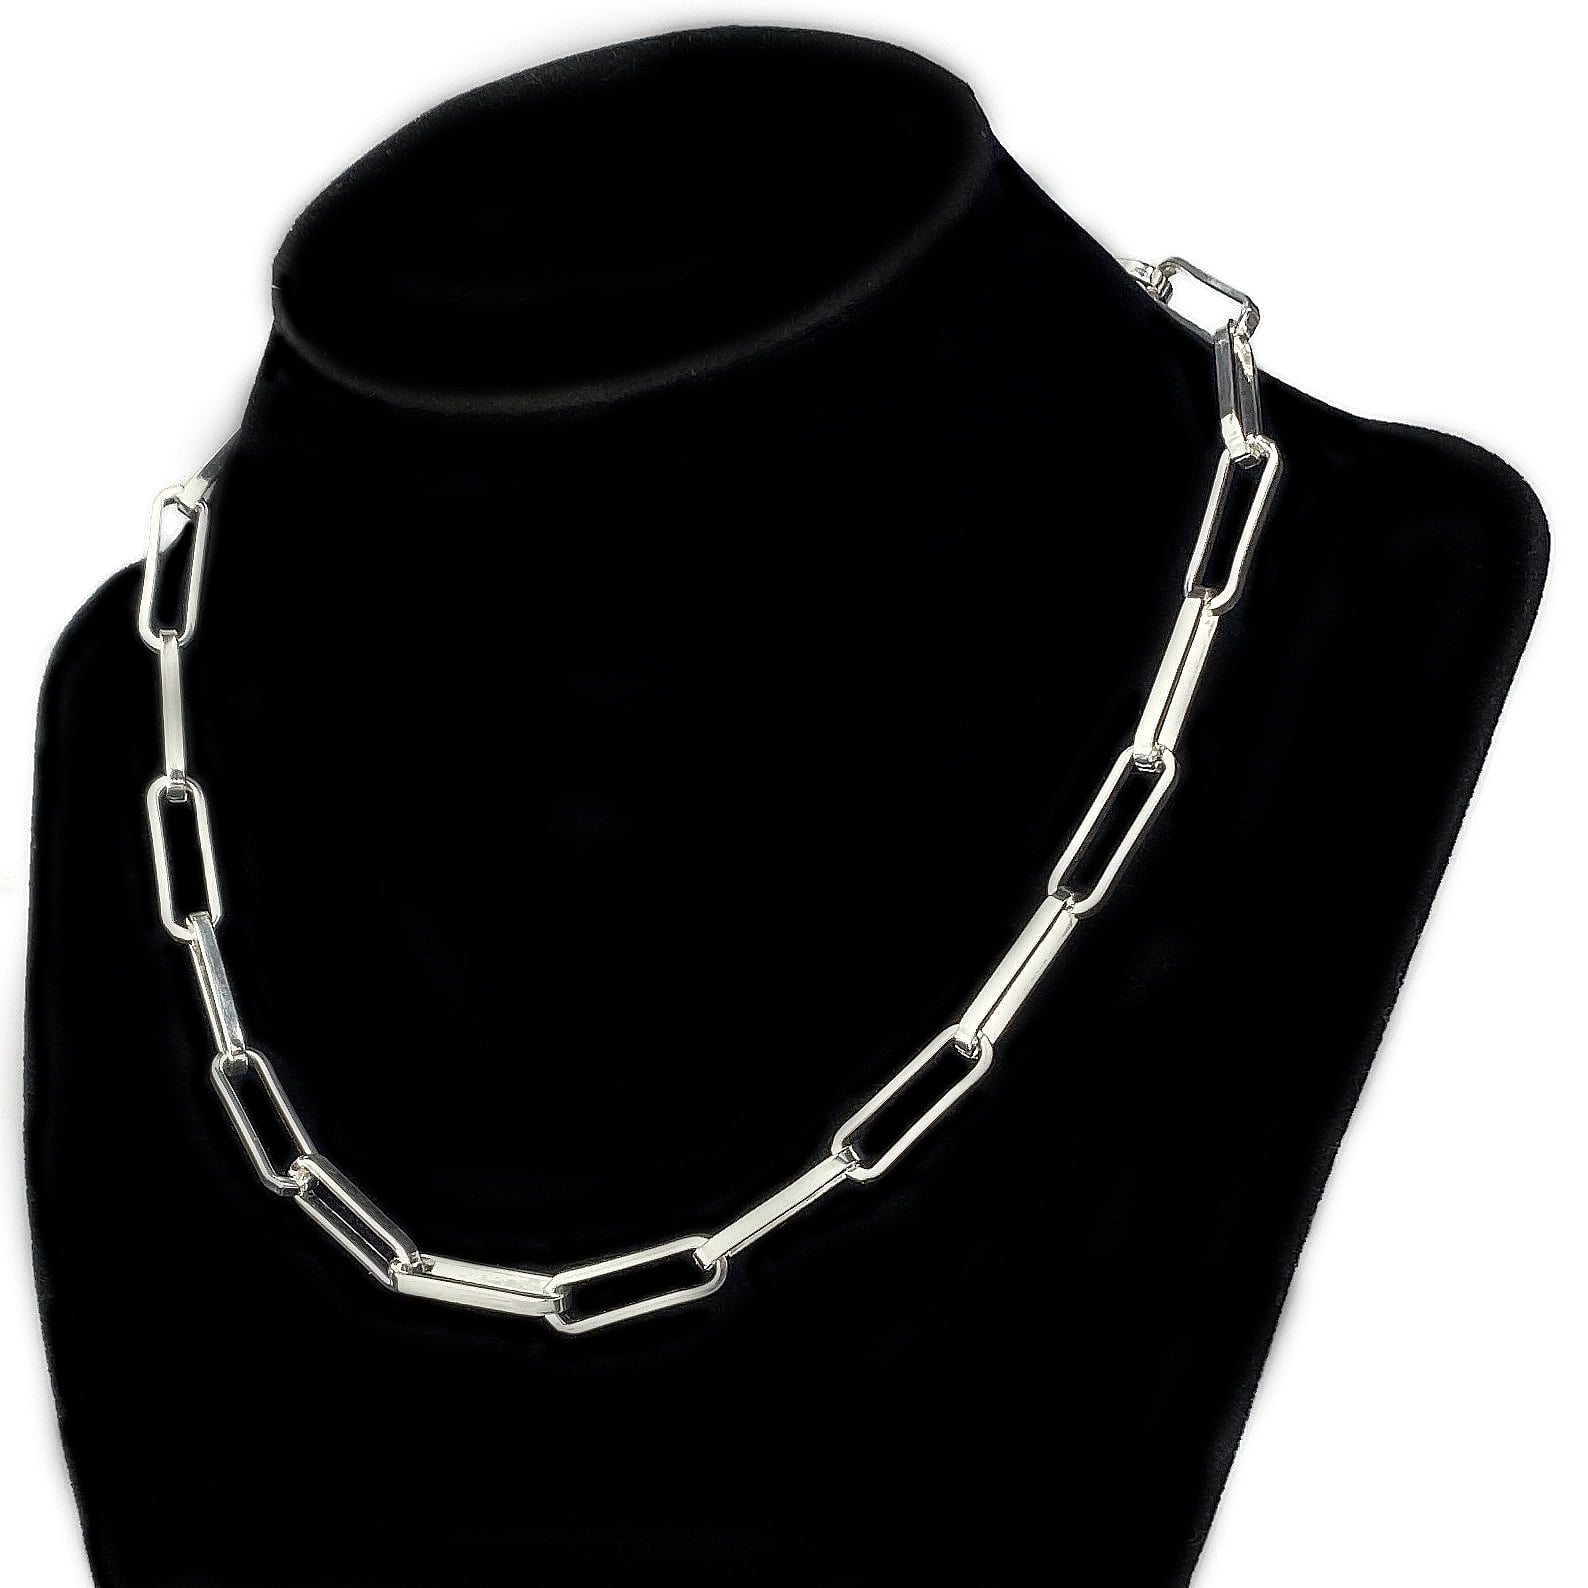 Solid 925 Sterling Silver Paperclip Chain Or Bracelet Large 7mm Necklace Italy